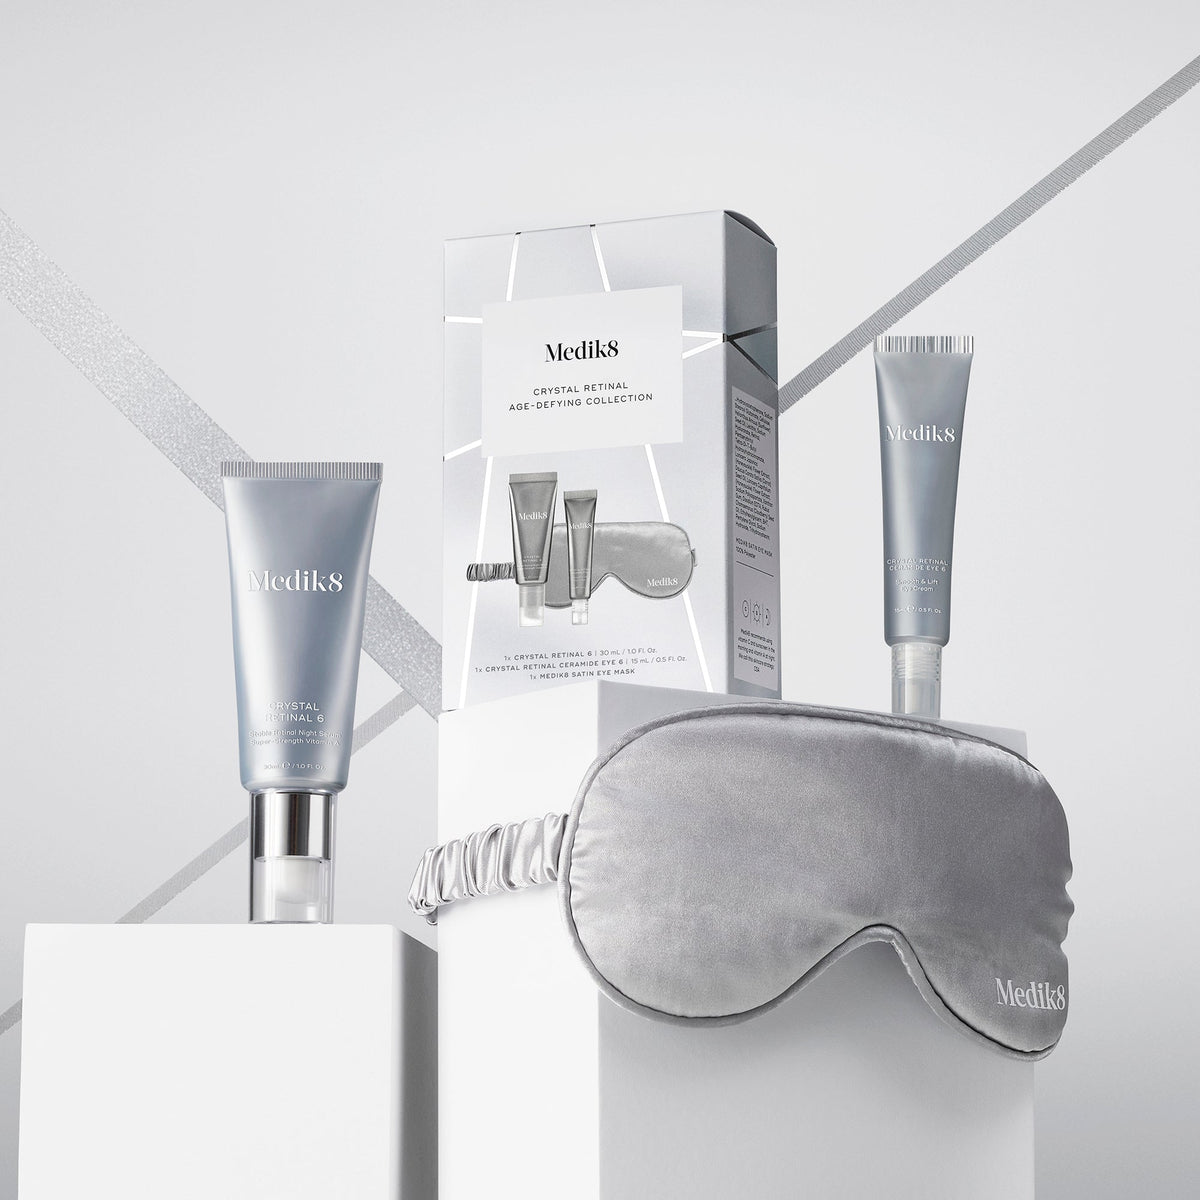 Medik8 Crystal Retinal Age-Defying Limited Edition Collection